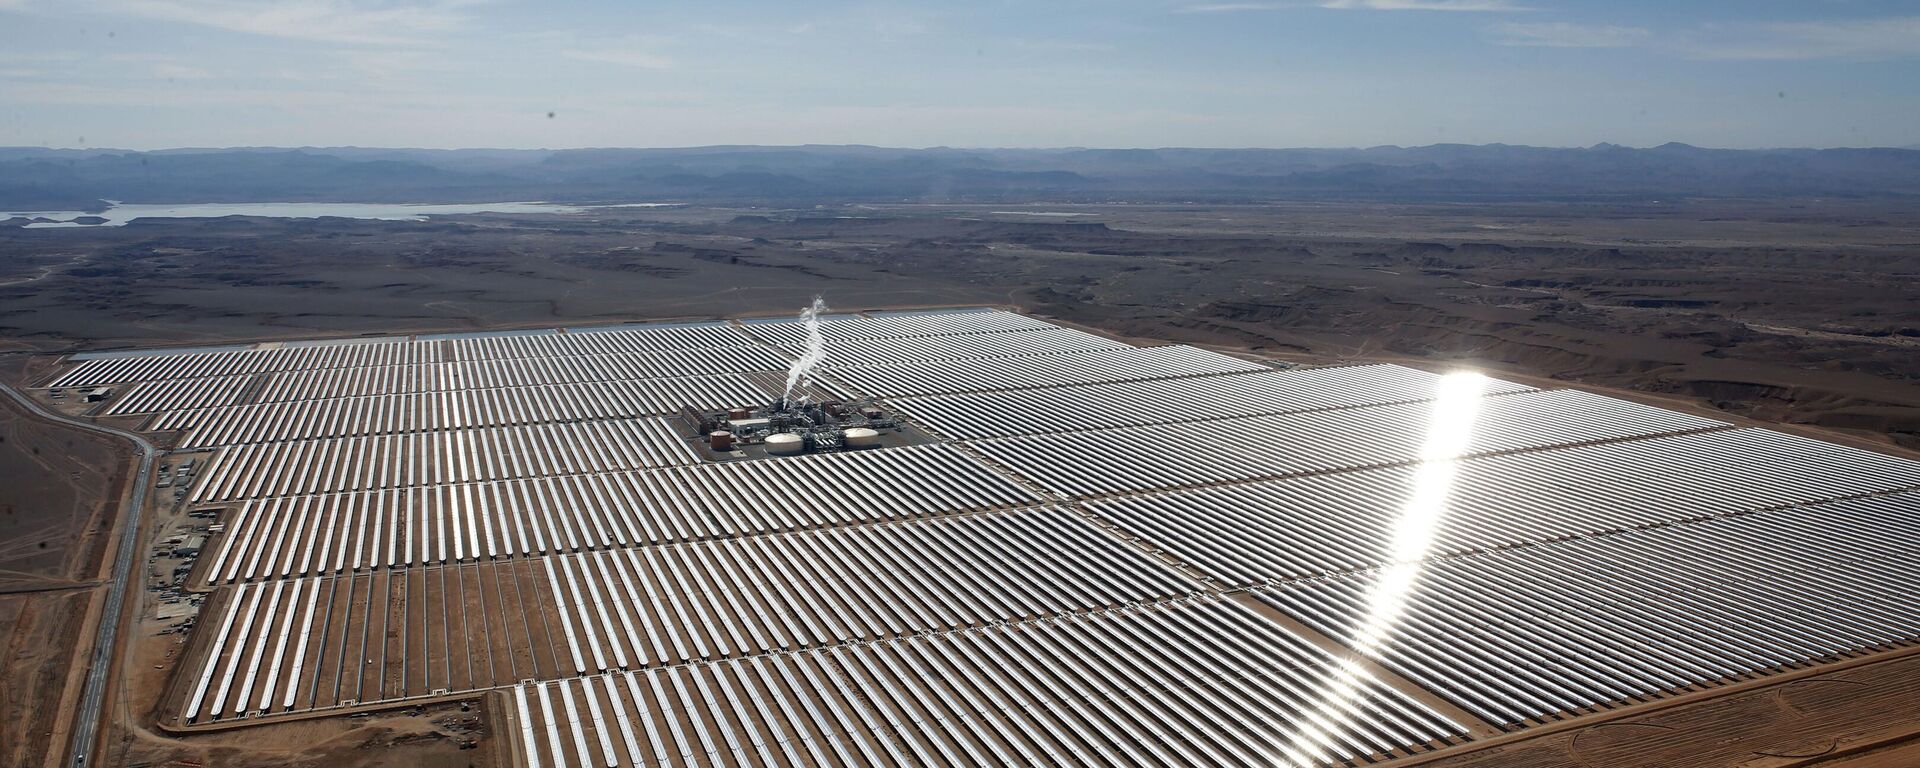  An aerial view of a solar power plant in Ouarzazate, central Morocco on Feb.4, 2016. Renewable energy's potential across the African continent remains largely untapped, according to a new report in April 2022 by the United Nation's Intergovernmental Panel on Climate Change.  - Sputnik India, 1920, 19.10.2023